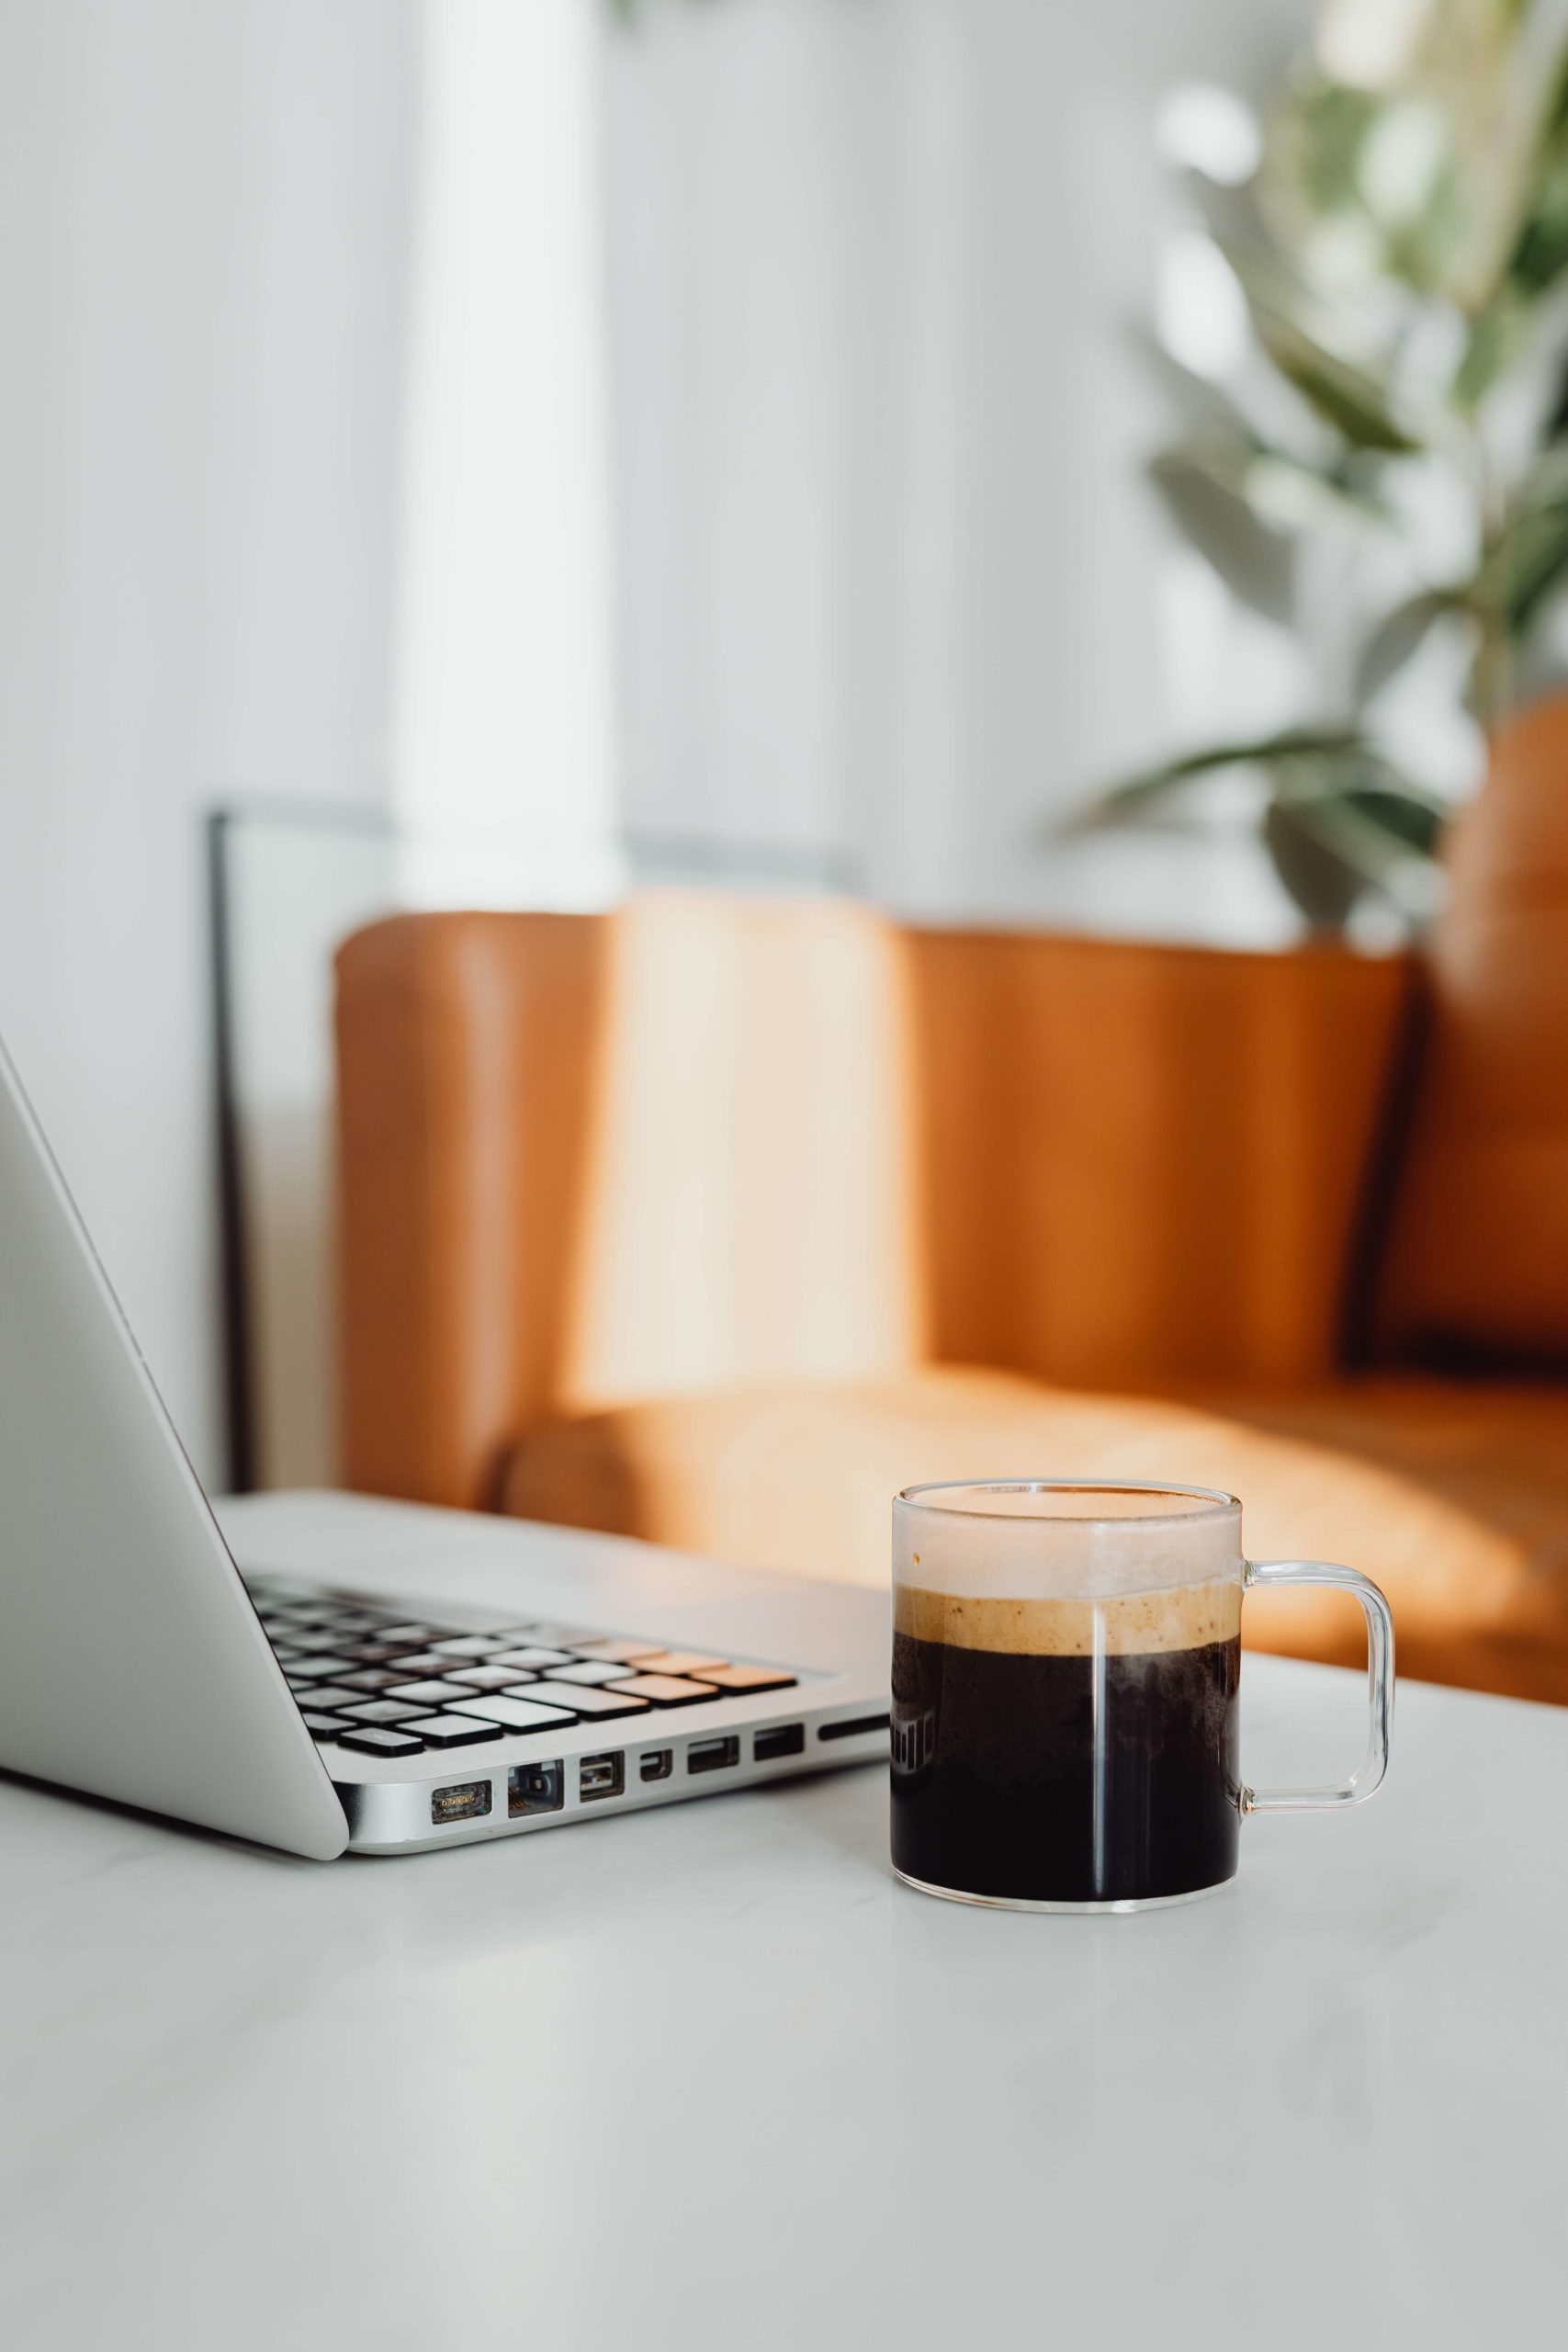 An americano in a glass mug sits next to a laptop on a white tabletop with a tan sofa in the background.